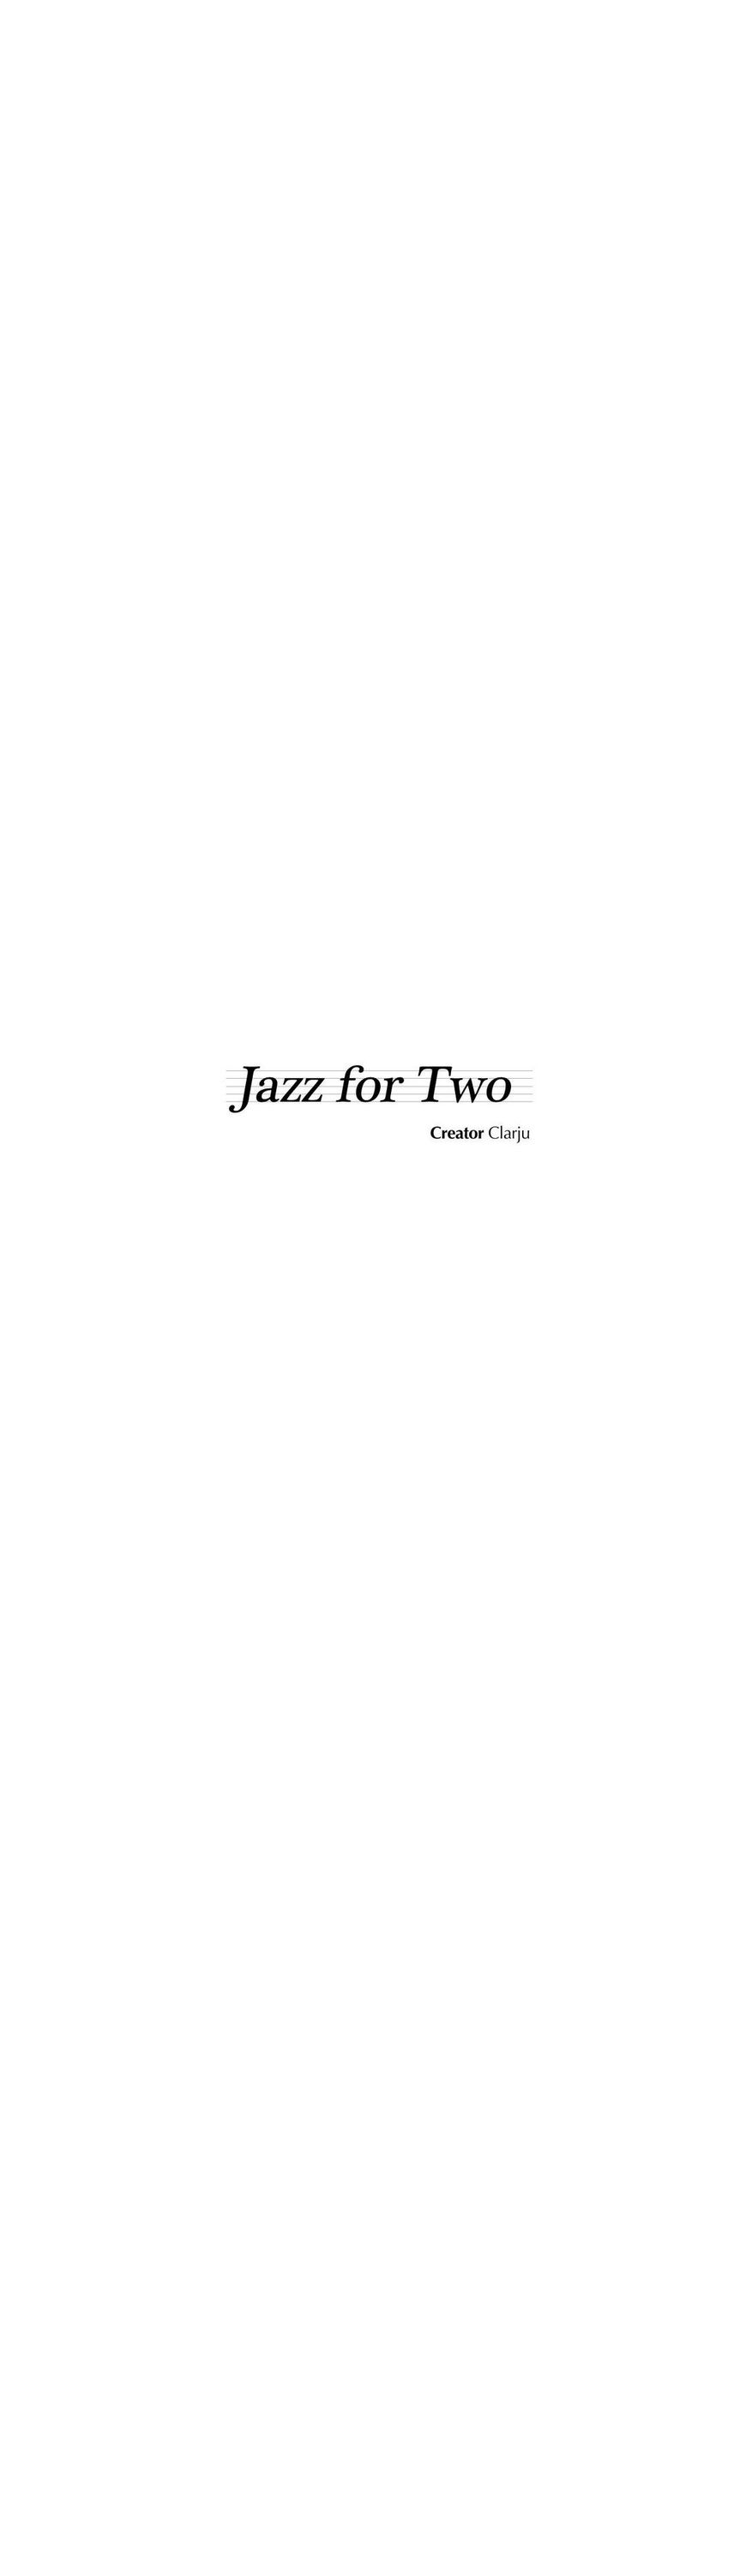 Jazz for Two 46